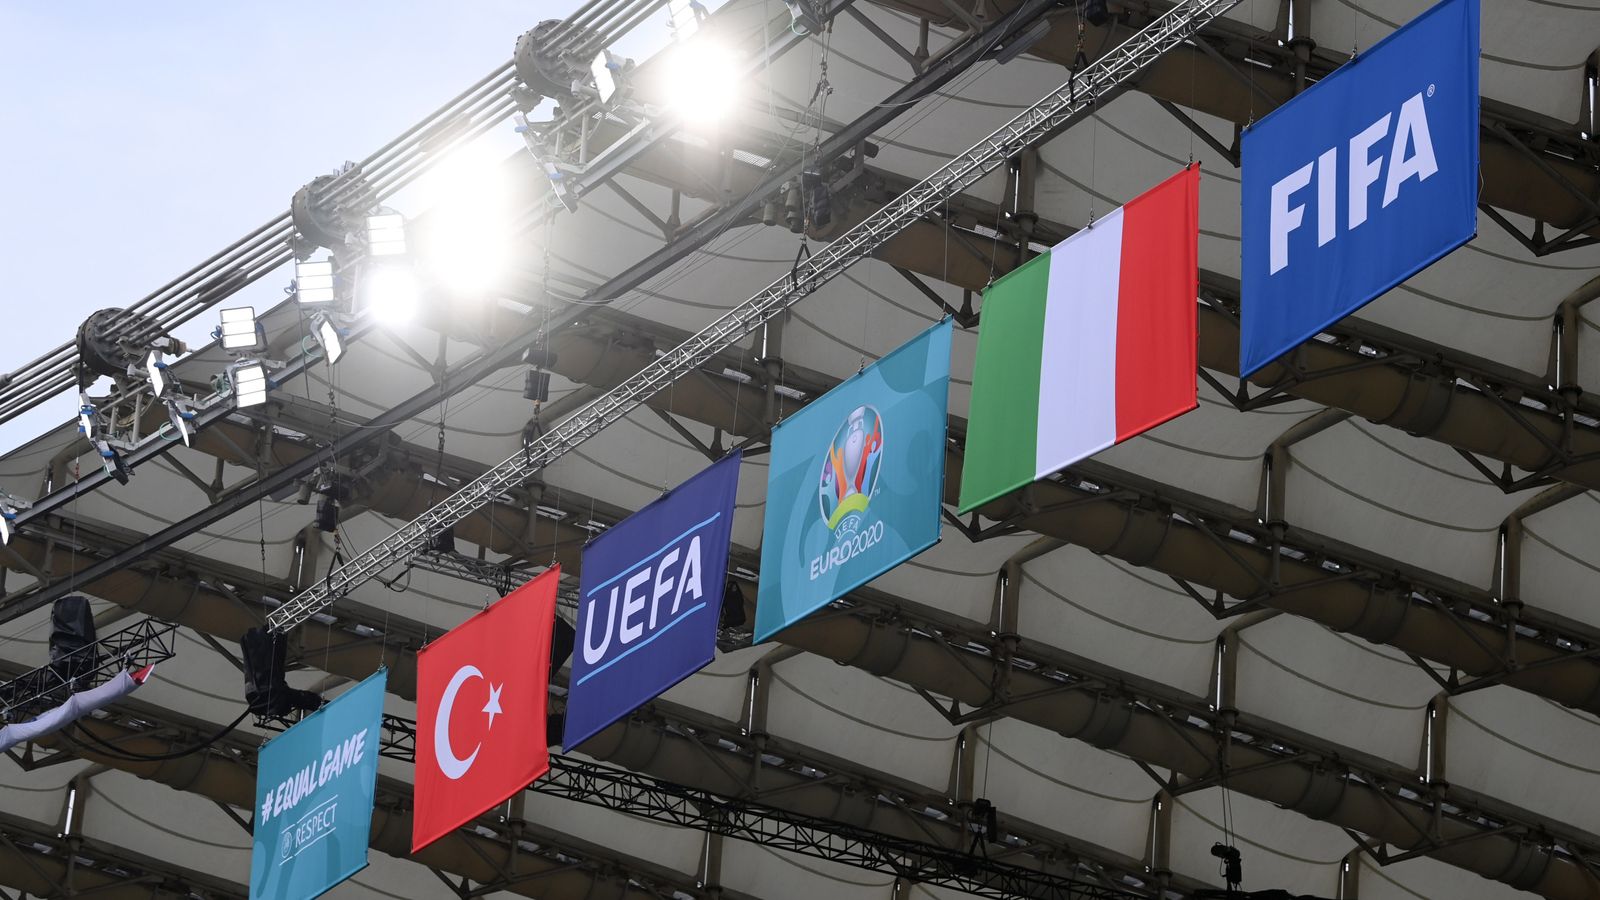 All the latest as Turkey and Italy go head-to-head in Euro 2020 opener - Around World journal